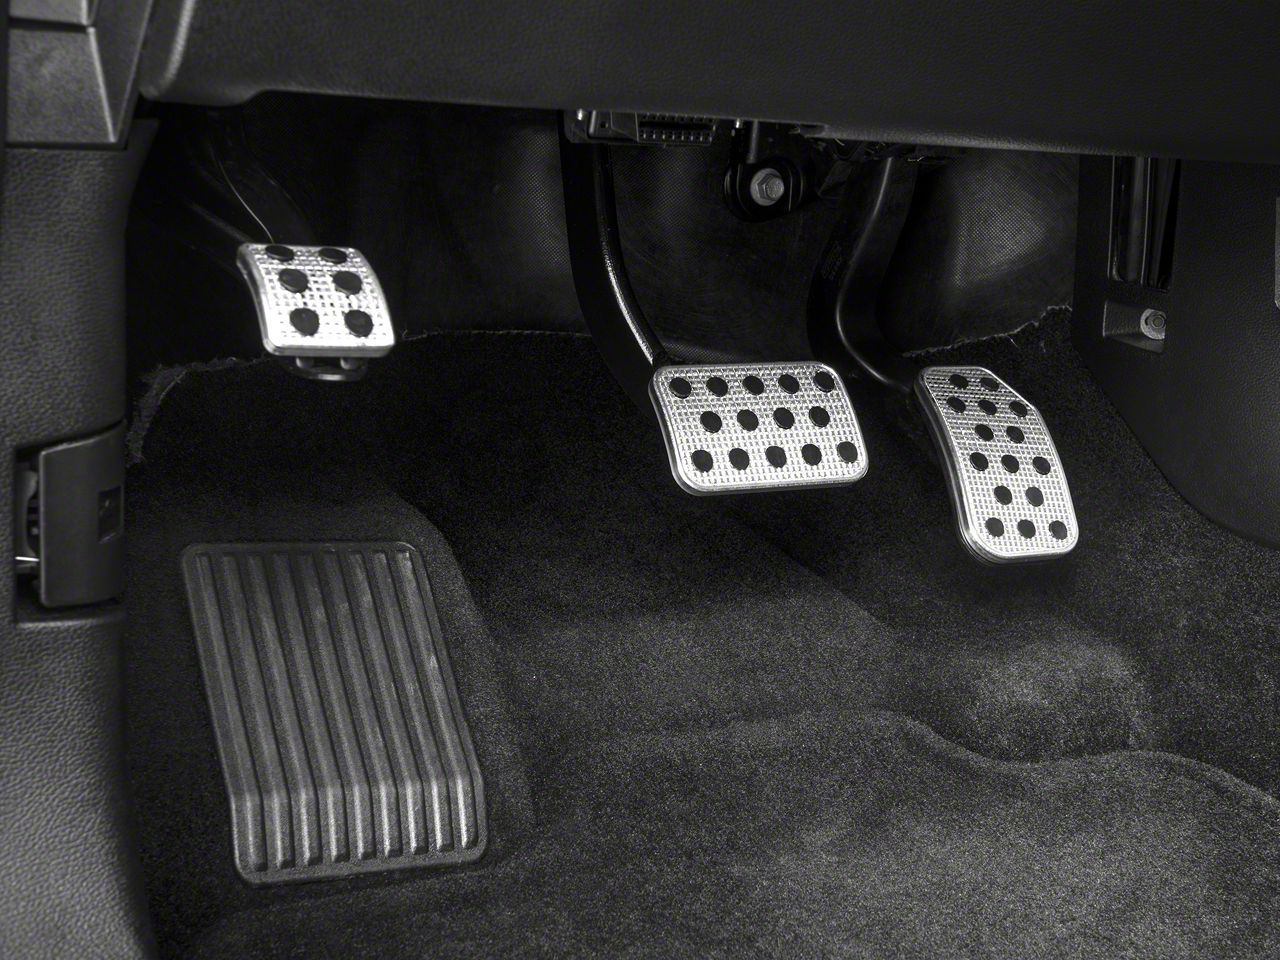 Ram 1500 Pedals & Pedal Covers 2002-2008